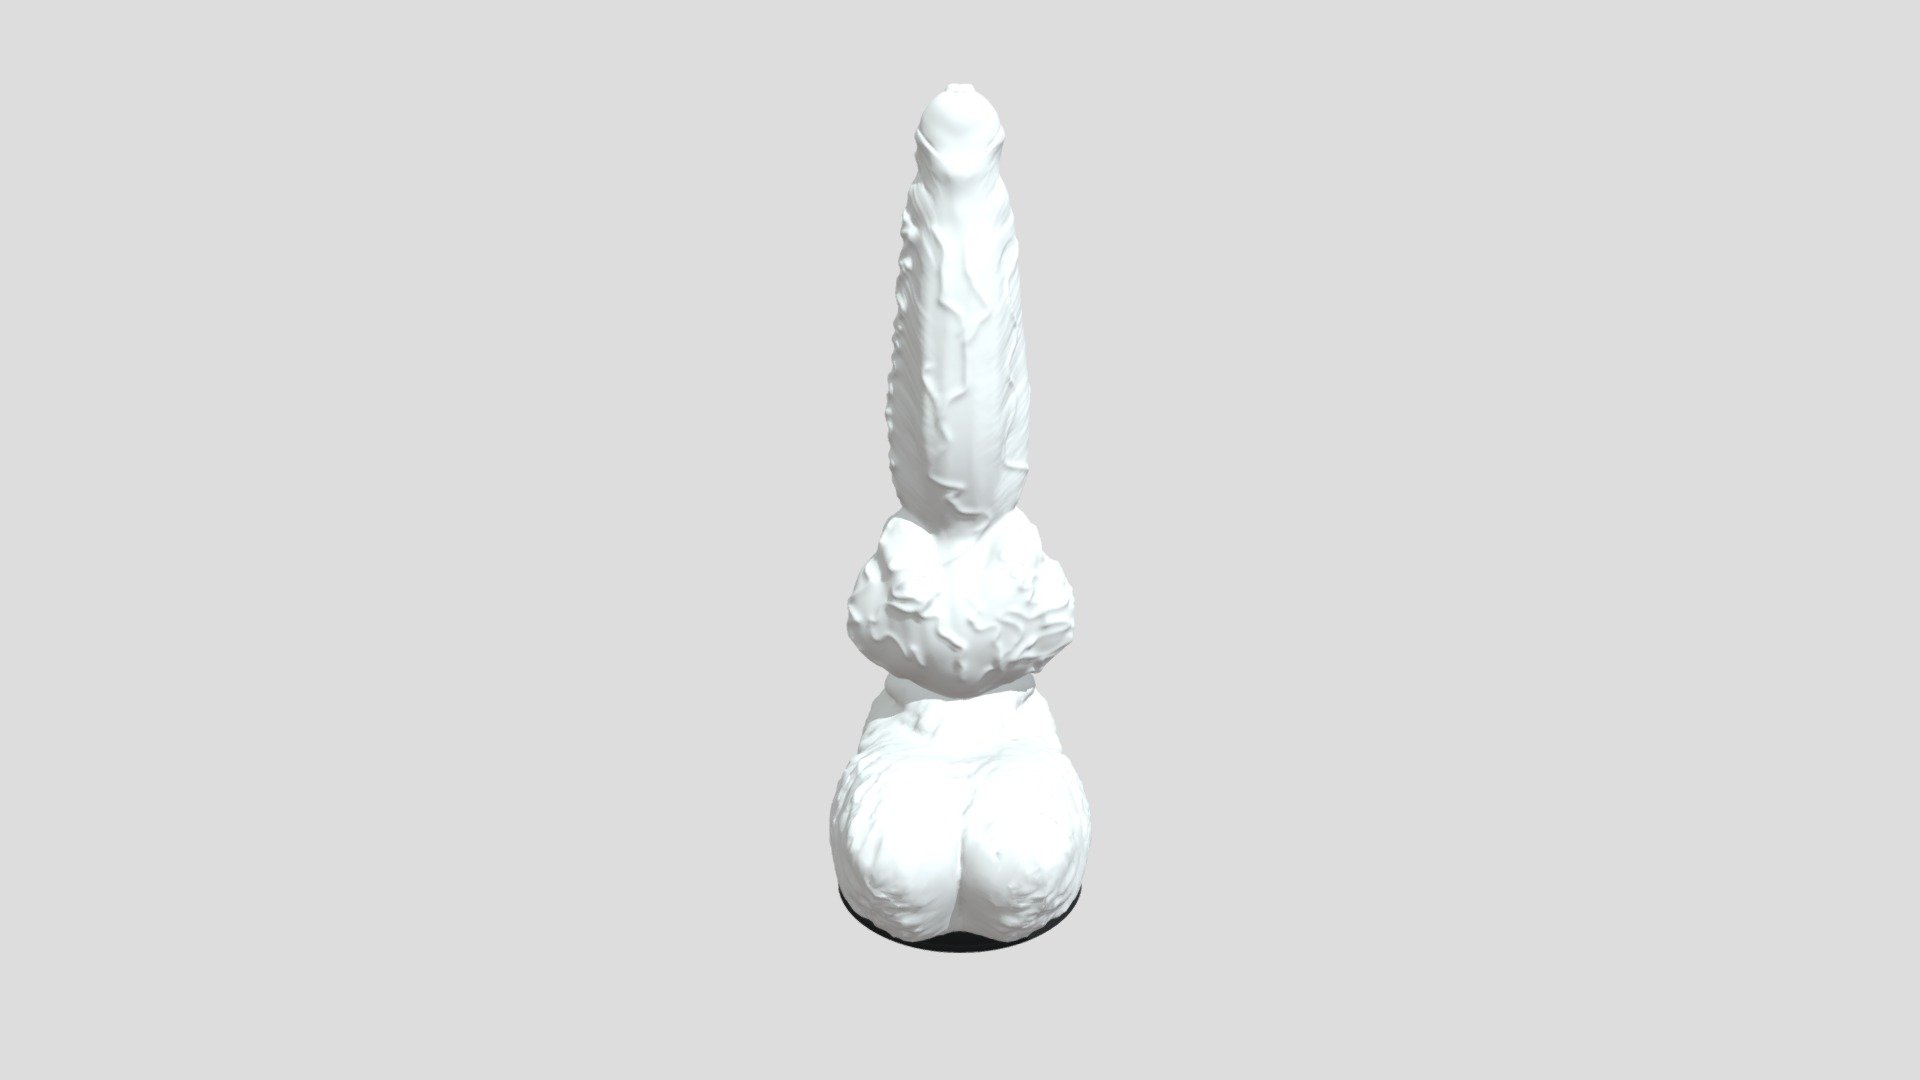 Dog Dildo Jerrod Rigged, materials made procedually generated, no texture were used for the render of this model

Highpoly mesh: 157k faces; 150k verts

Exported only into the next format files (inxluded in the .zip already)
.blend (native)
.abc
.dae
.usdc
.fbx
.stl
.ply
.obj .mtl
.x3d

Kind Regards, TriDsign - Jerrod Dog Dildo - 3D model by TriDsign (@revash05) 3d model